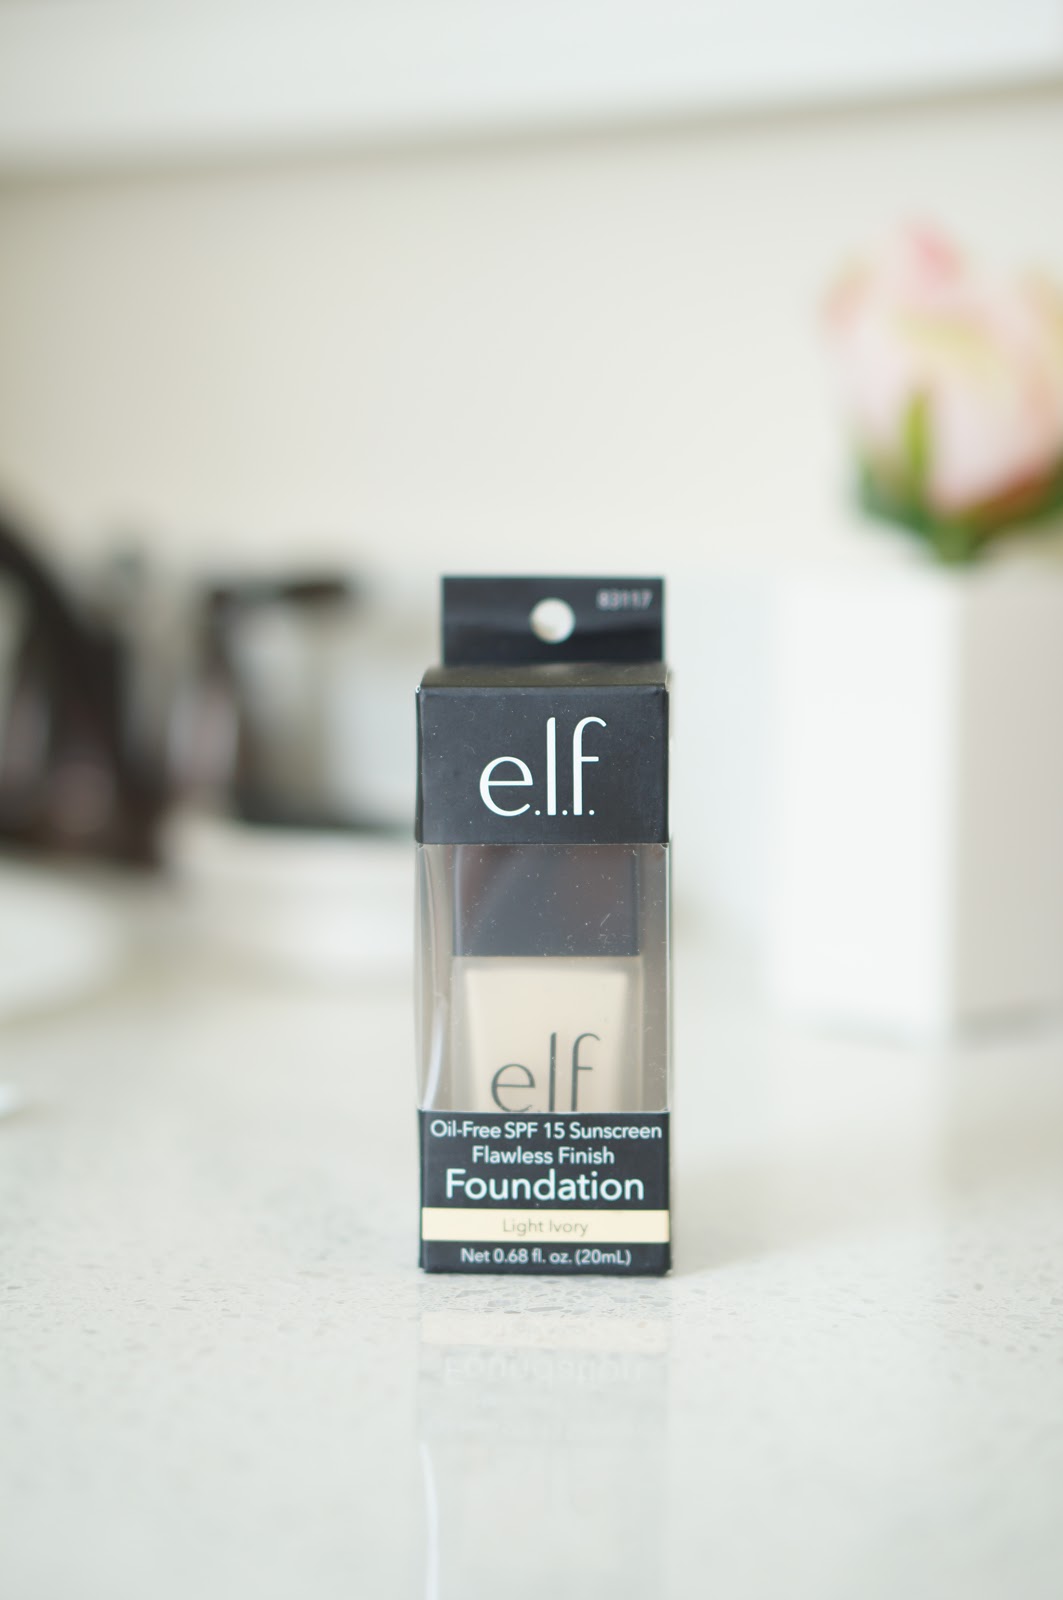 Popular North Carolina blogger Rebecca Lately shares her newest foundation Friday find.  Check out her review on the E.L.F. Flawless Finish Foundation!